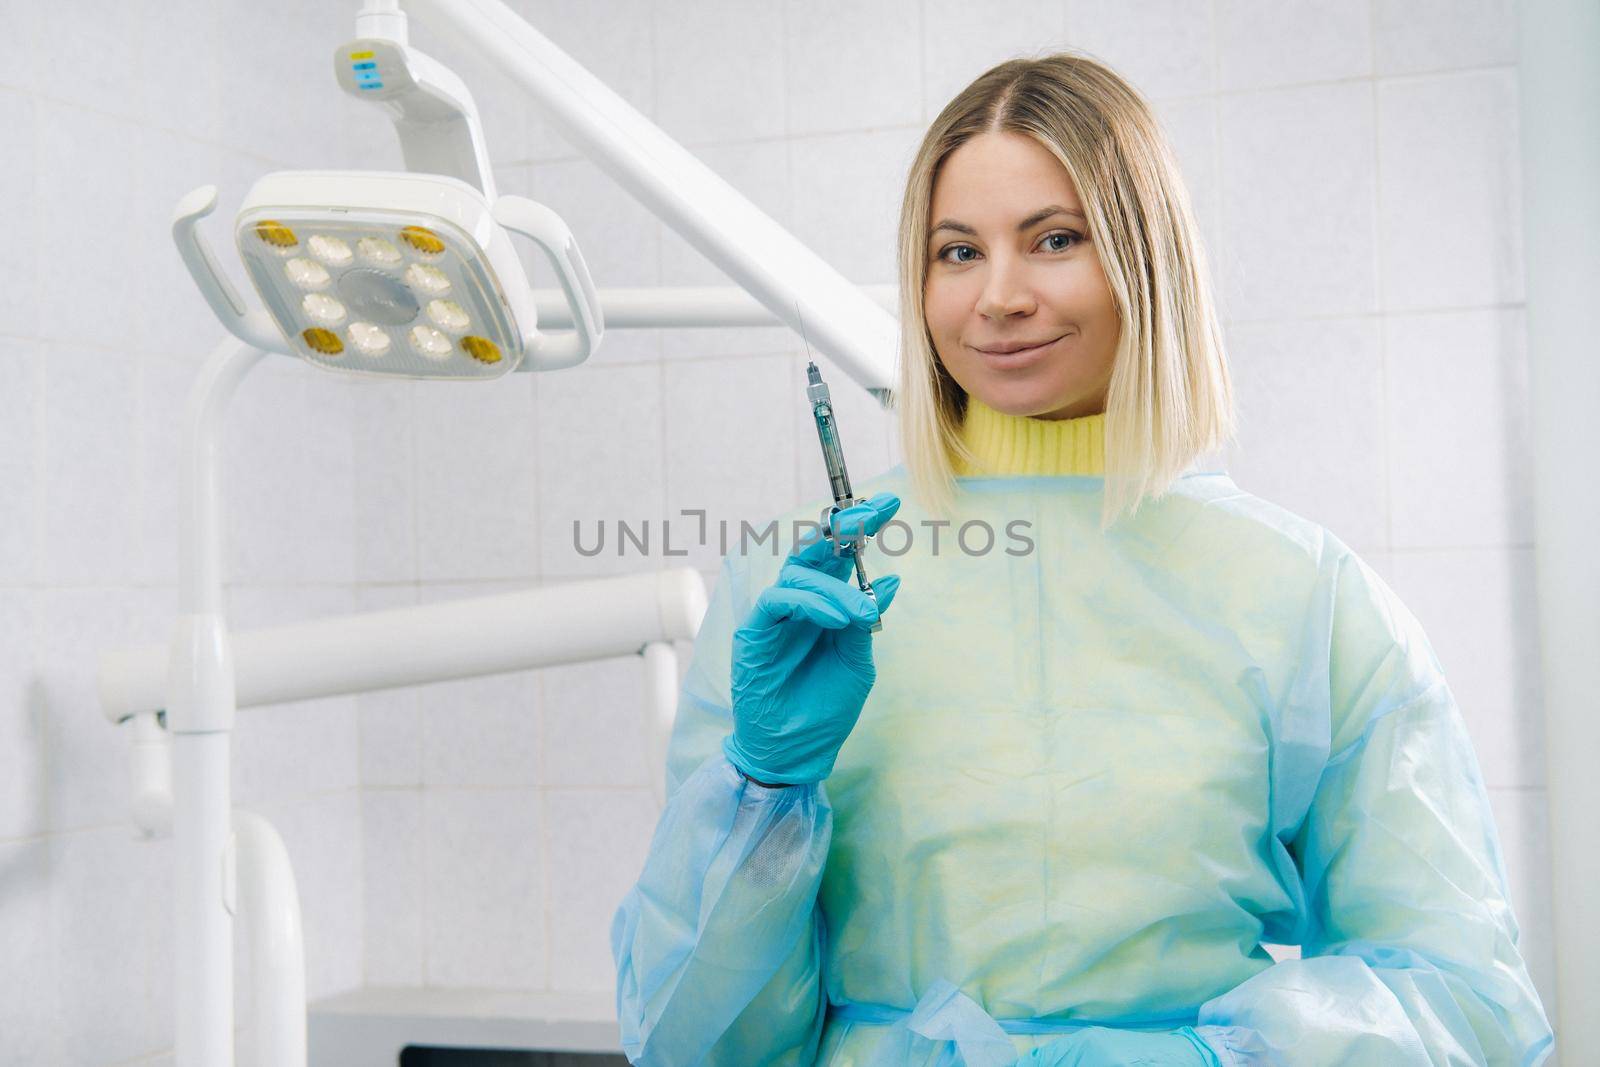 The dentist holds an injection syringe for the patient in the office.